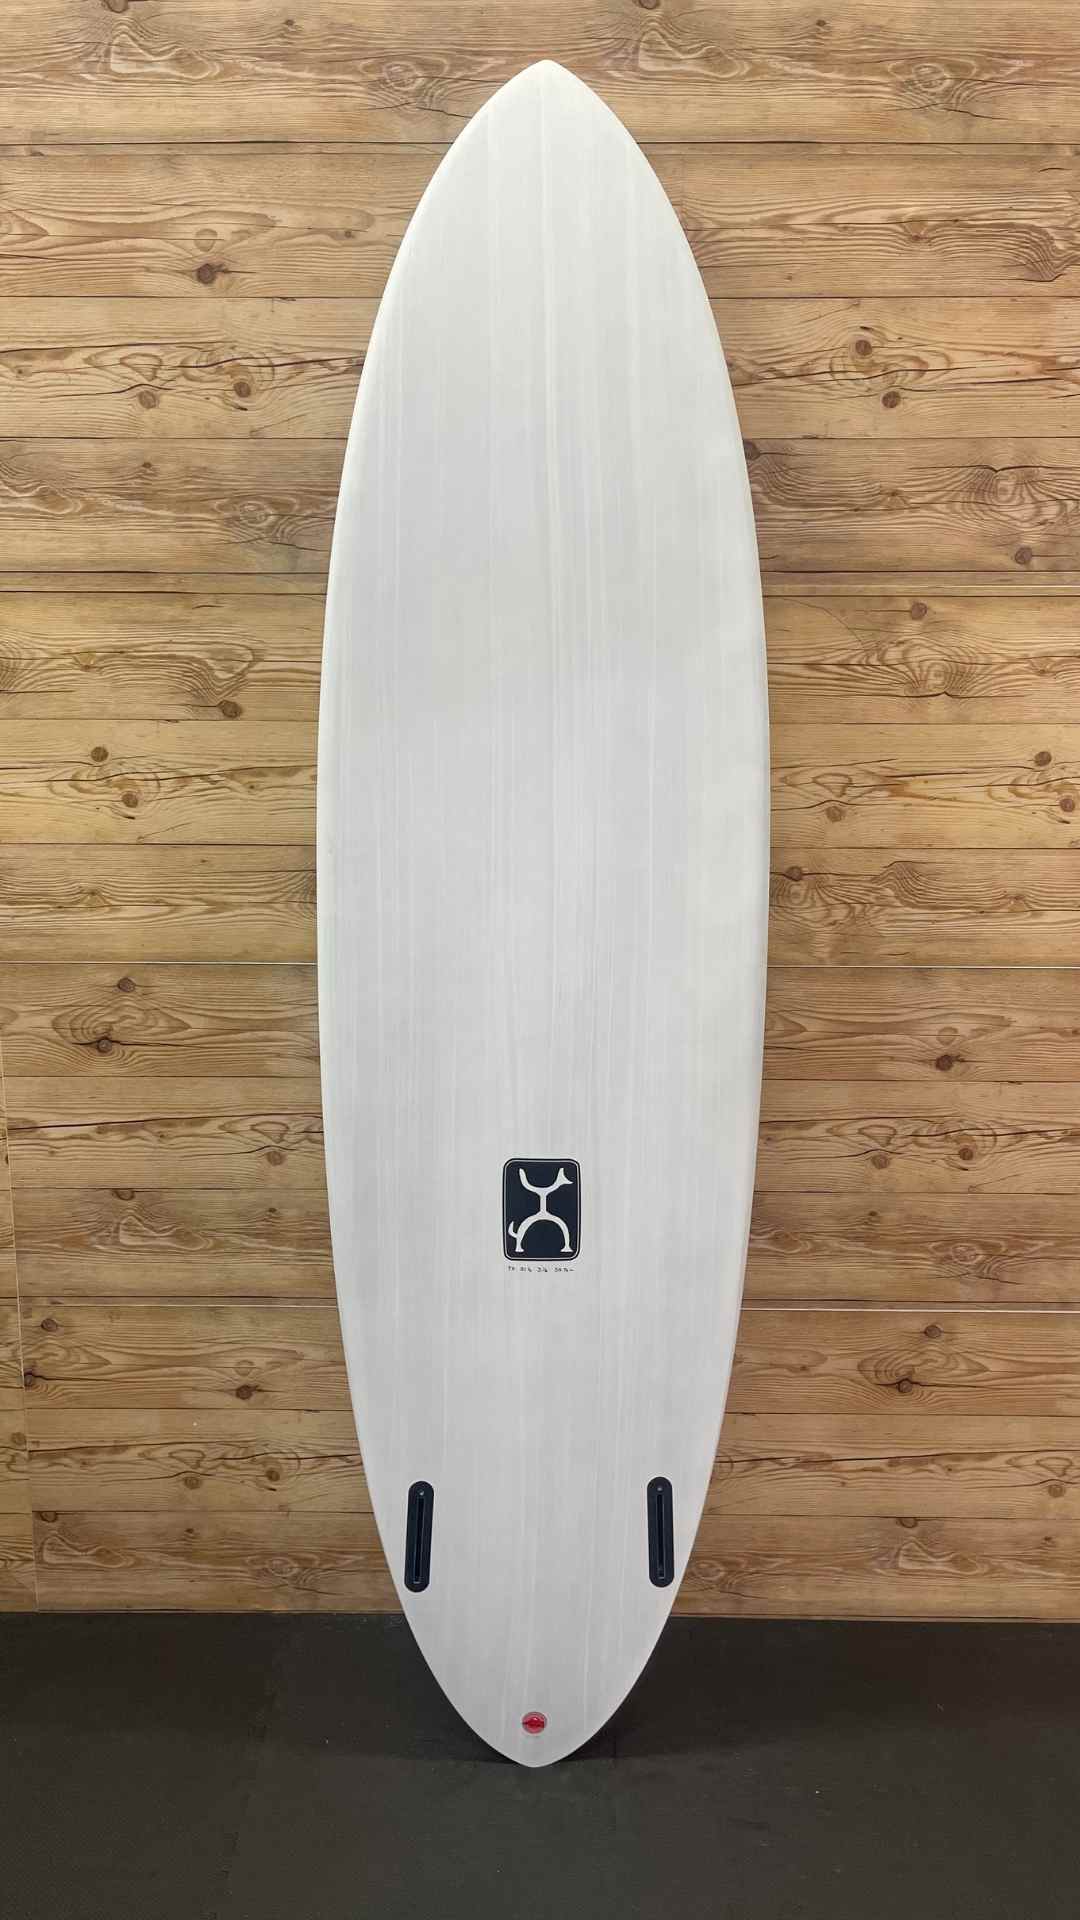 Discounted Firewire 7.0 Sunday Surfboard on Sale – The Board Source